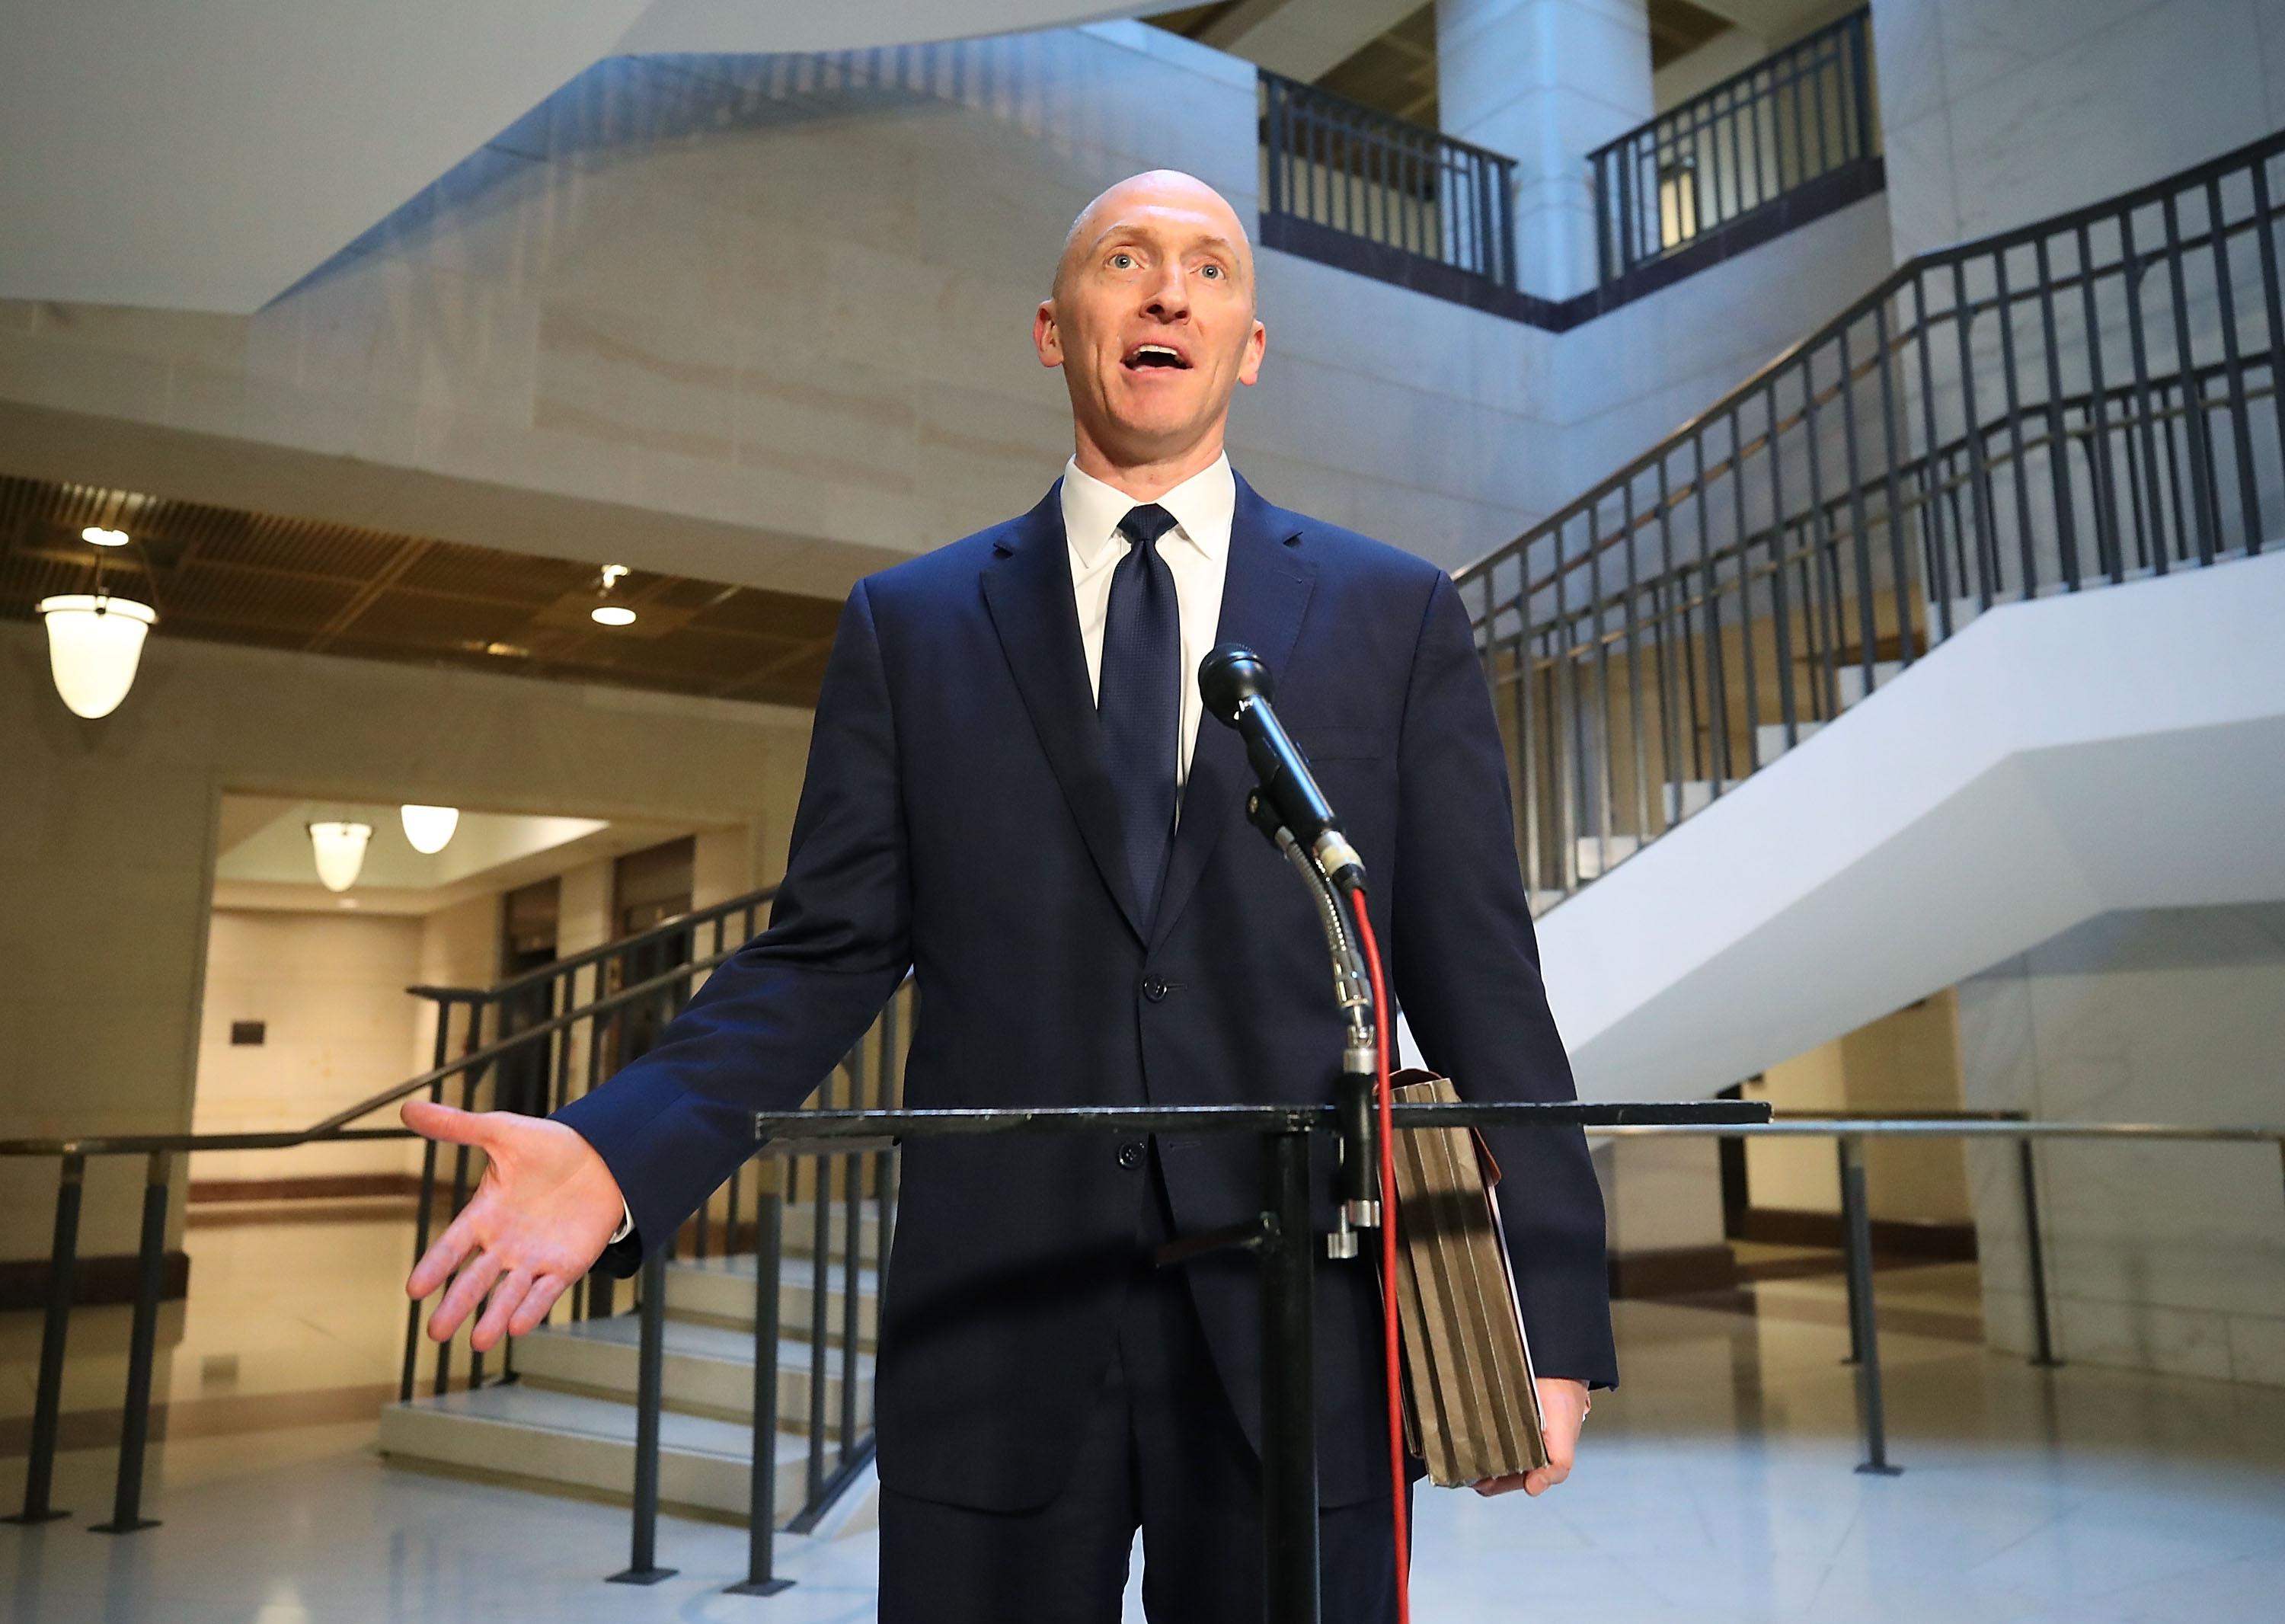 Carter Page, former foreign policy adviser for the Trump campaign, speaks to the media after testifying before the House Intelligence Committee on November 2, 2017 in Washington, DC. The committee conducting an investigation into Russia's tampering in the 2016 election.